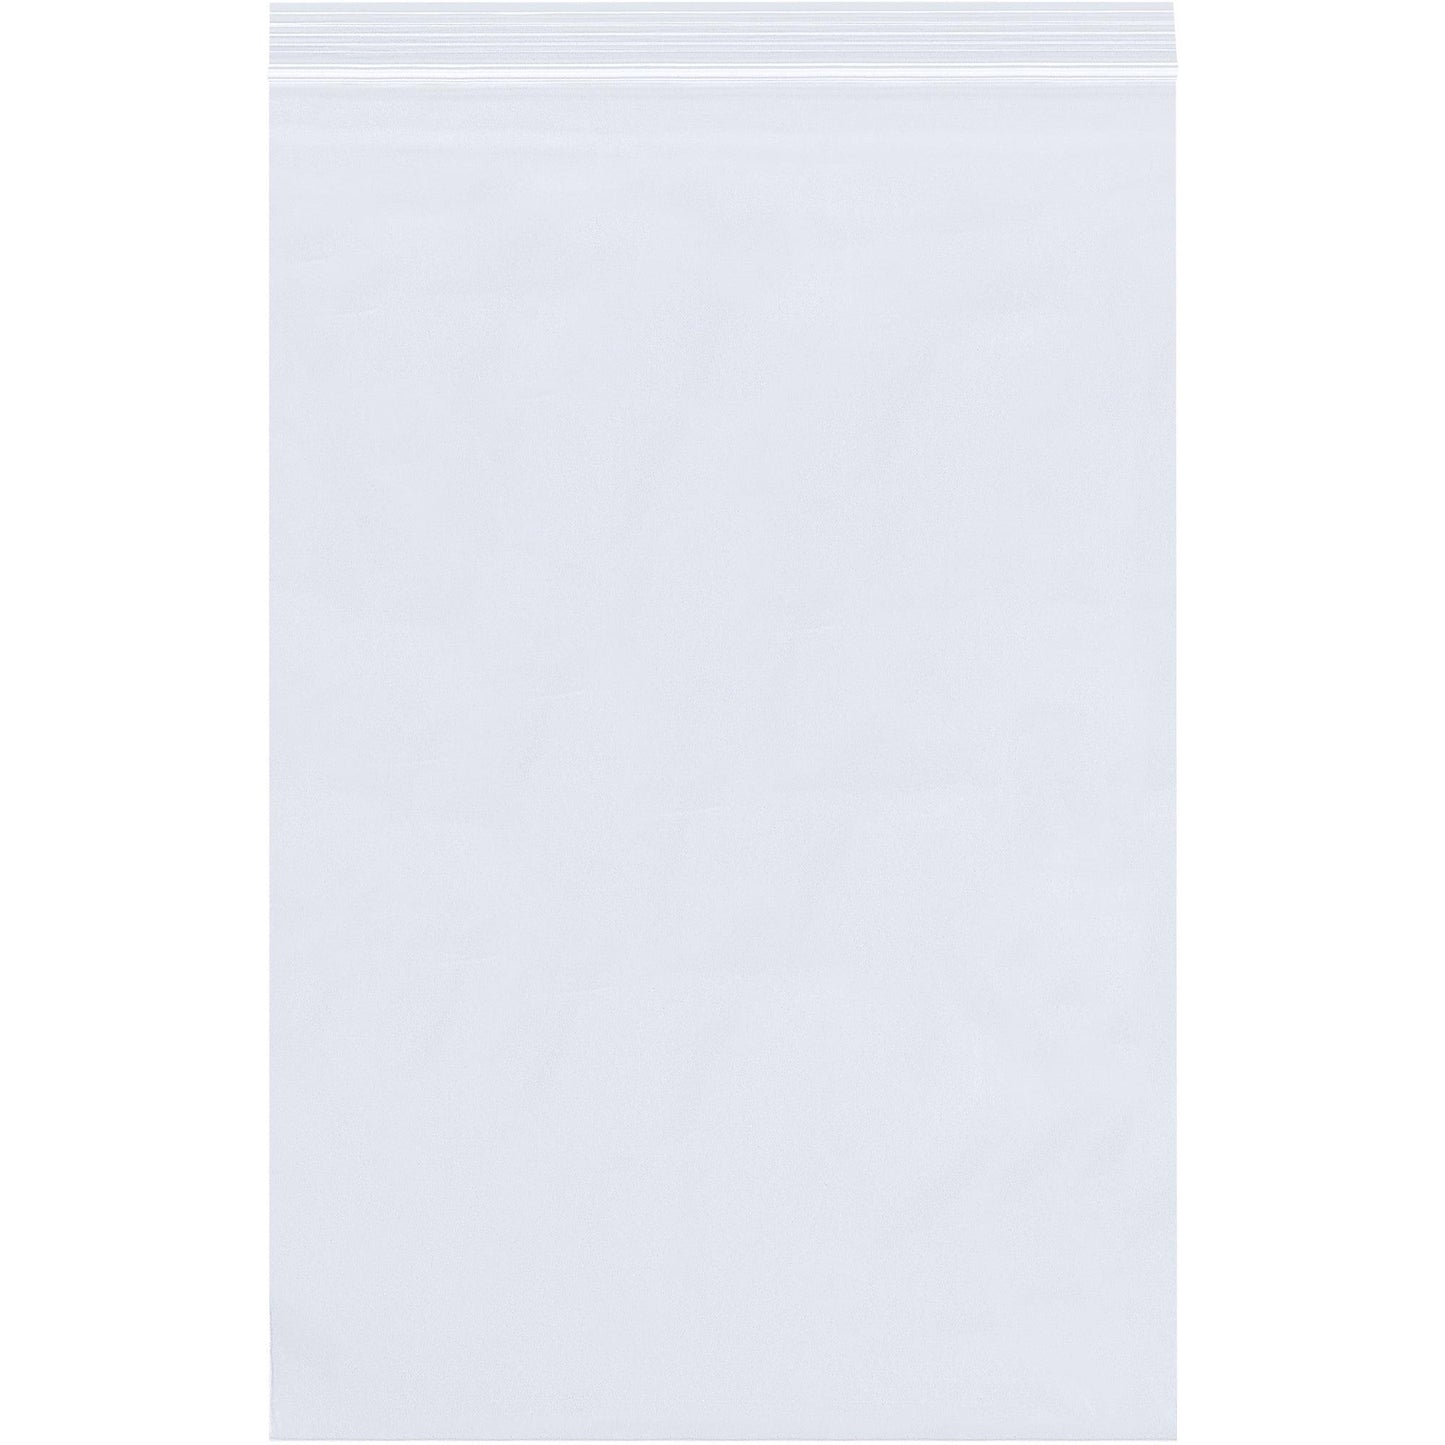 7 x 12" - 4 Mil Reclosable Poly Bags - PB3753